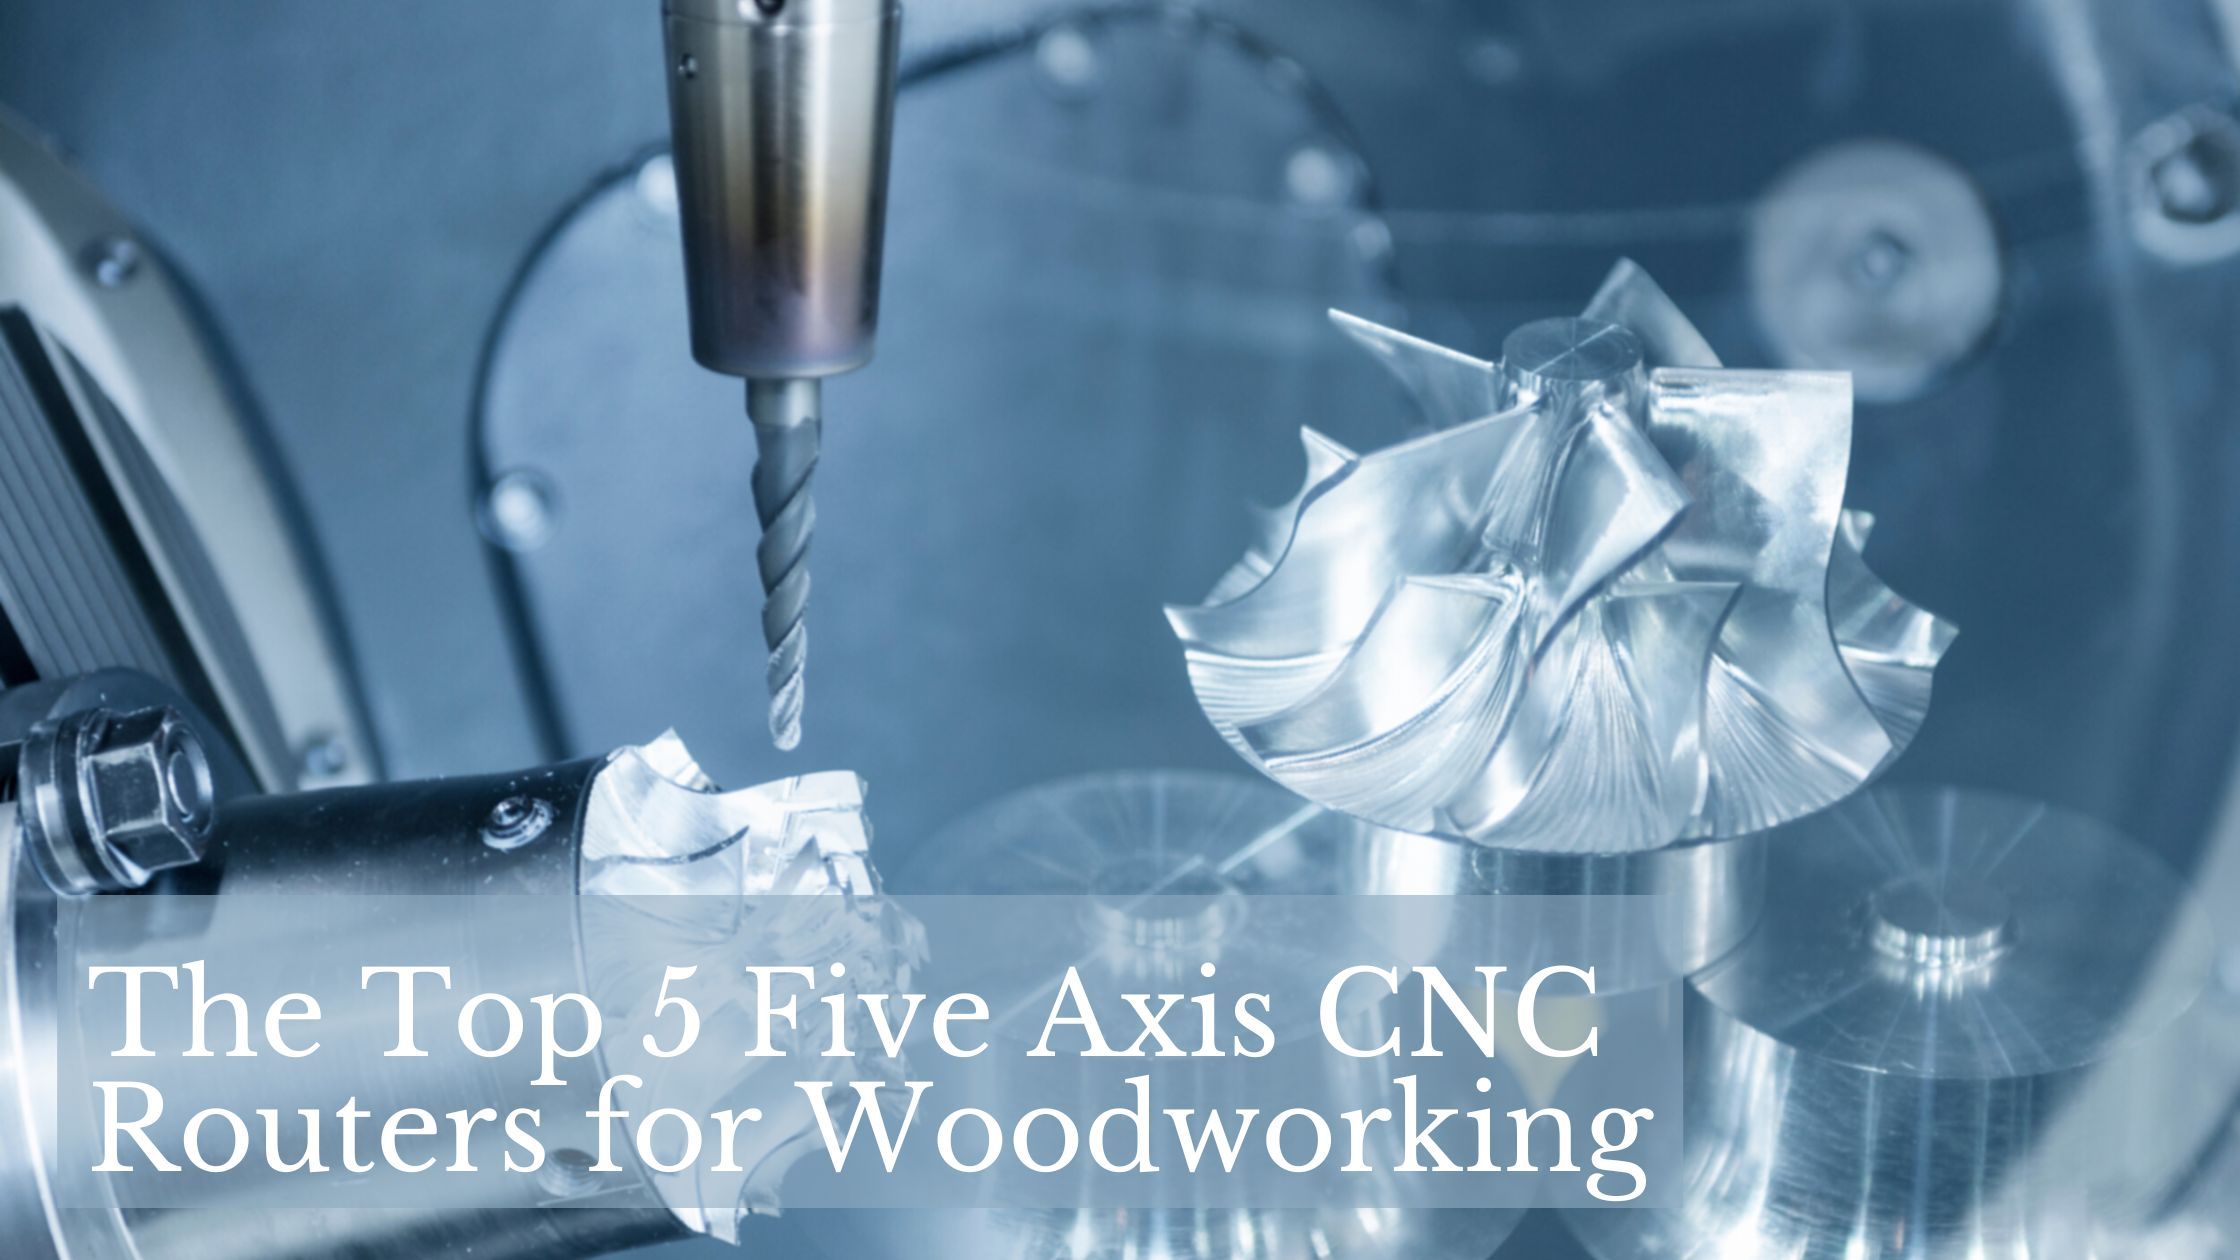 The Top 5 Five Axis CNC Routers for Woodworking